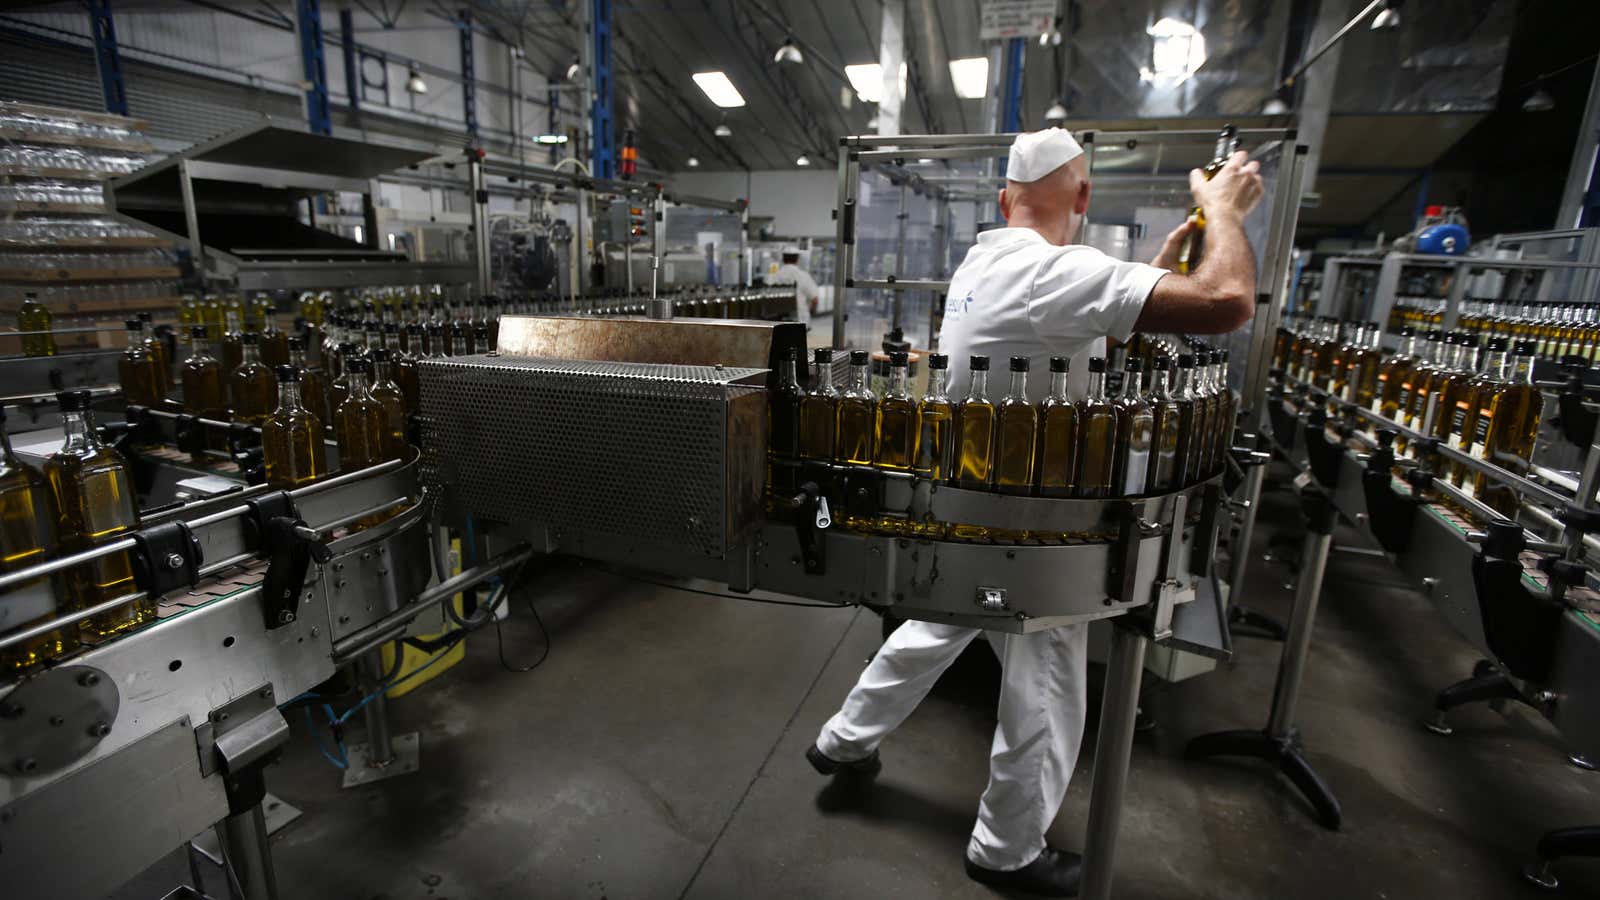 Spain is the world’s largest olive oil producer, and sales are picking up.